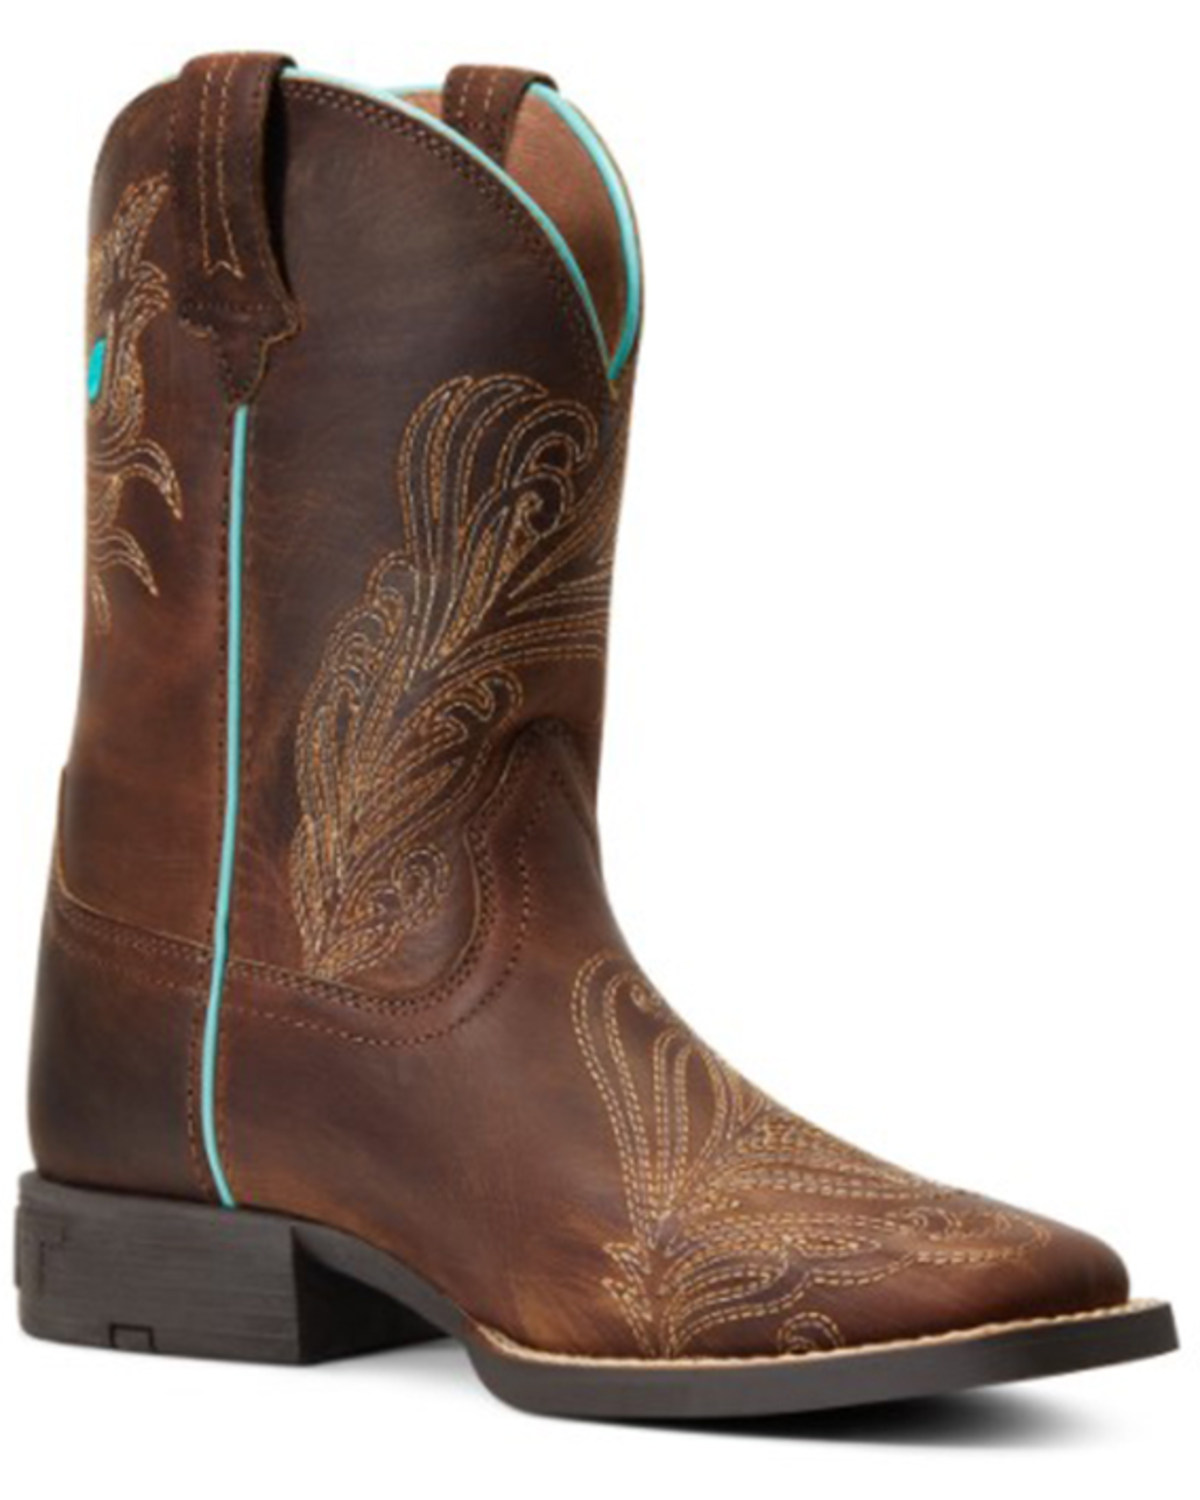 Ariat Girls' Bright Eyes II Hat Leather Boot - Broad Square Toe